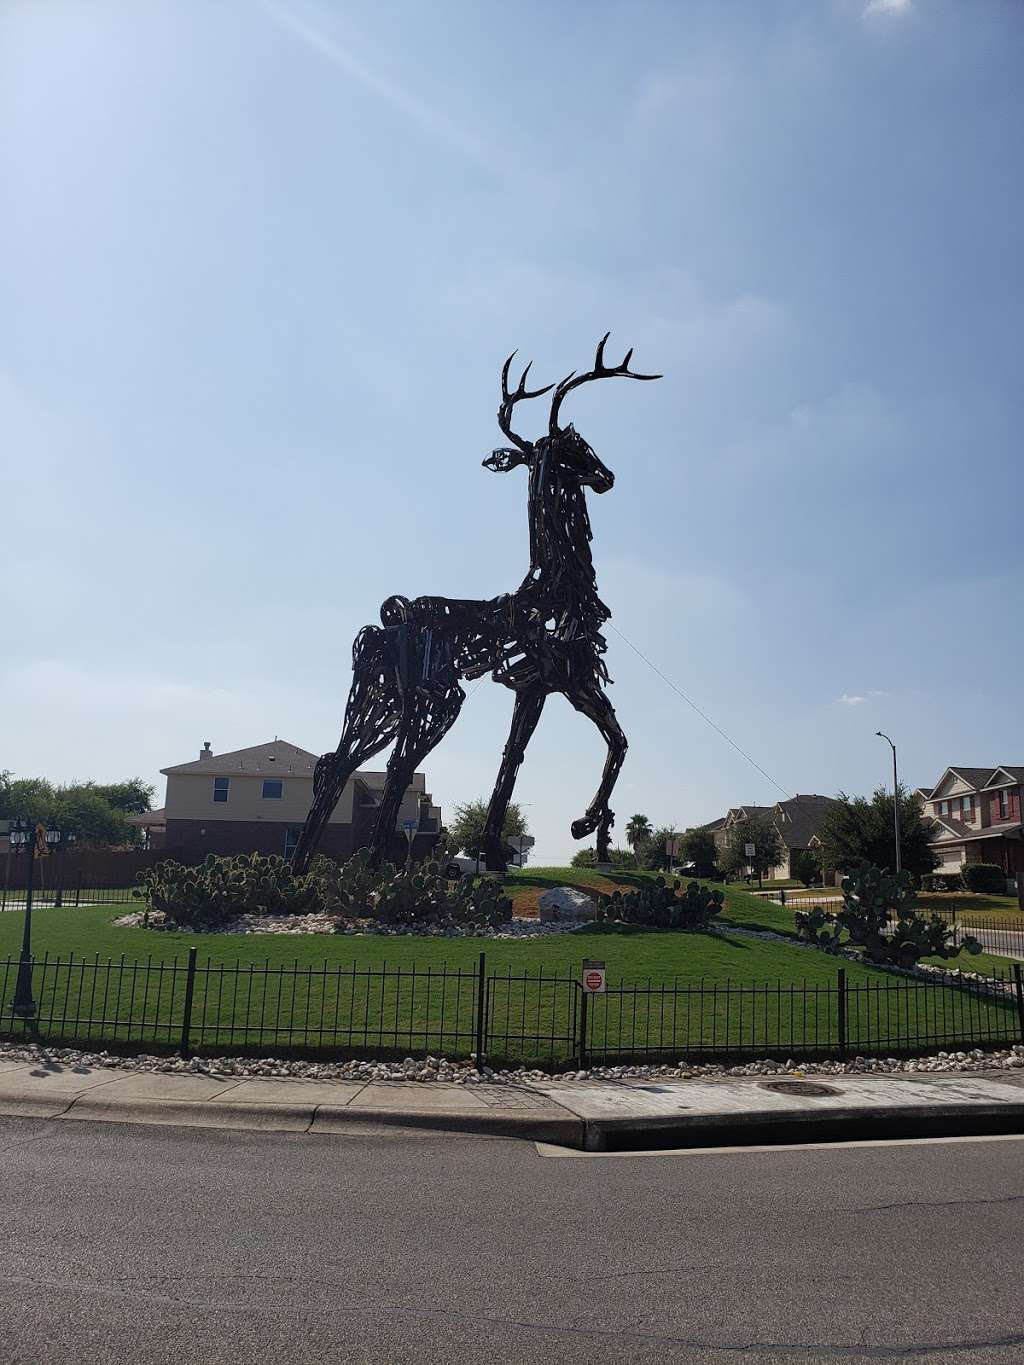 Giant Stag Statue | 05089-000-1000, Converse, TX 78109, USA